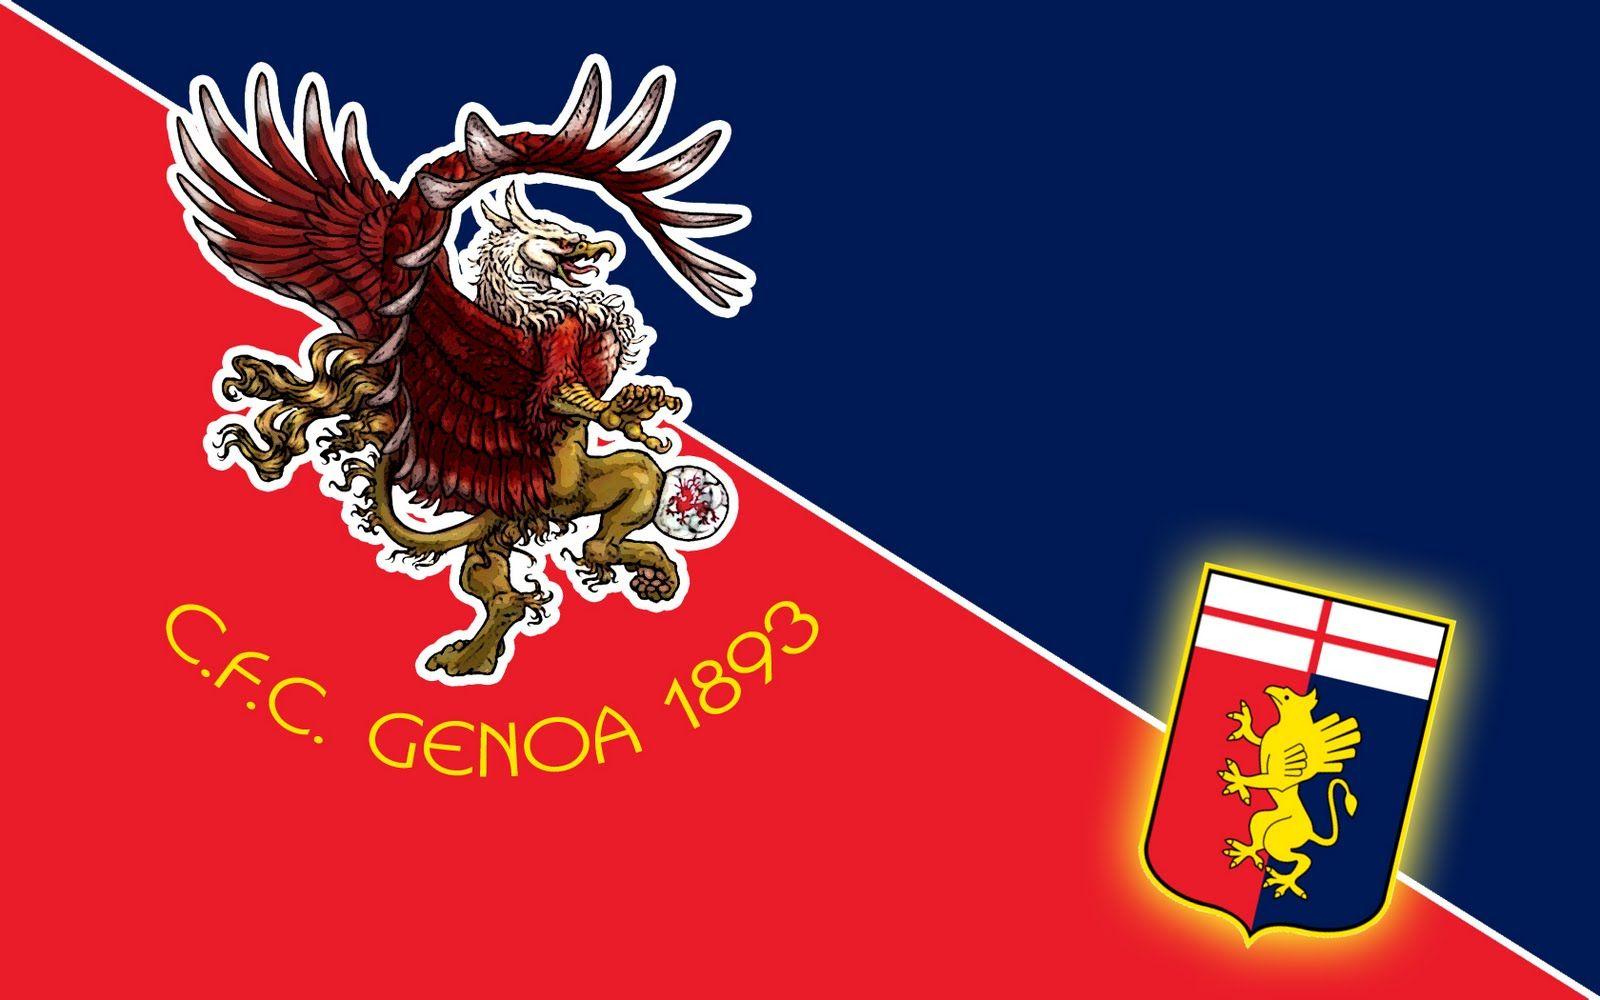 Wallpapers free picture Genoa FC Wallpapers